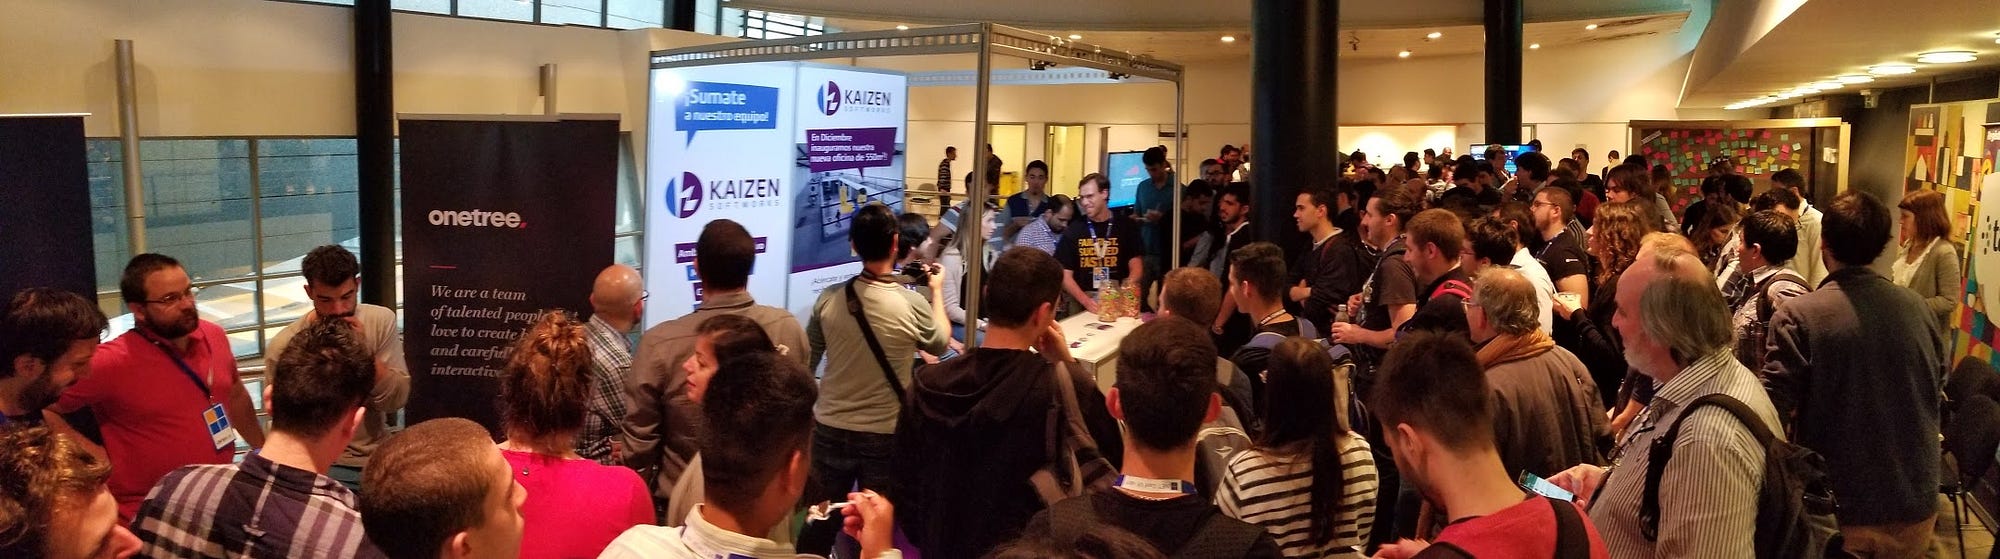 Photo from the Kaizen Softworks booth at .NET Conf UY